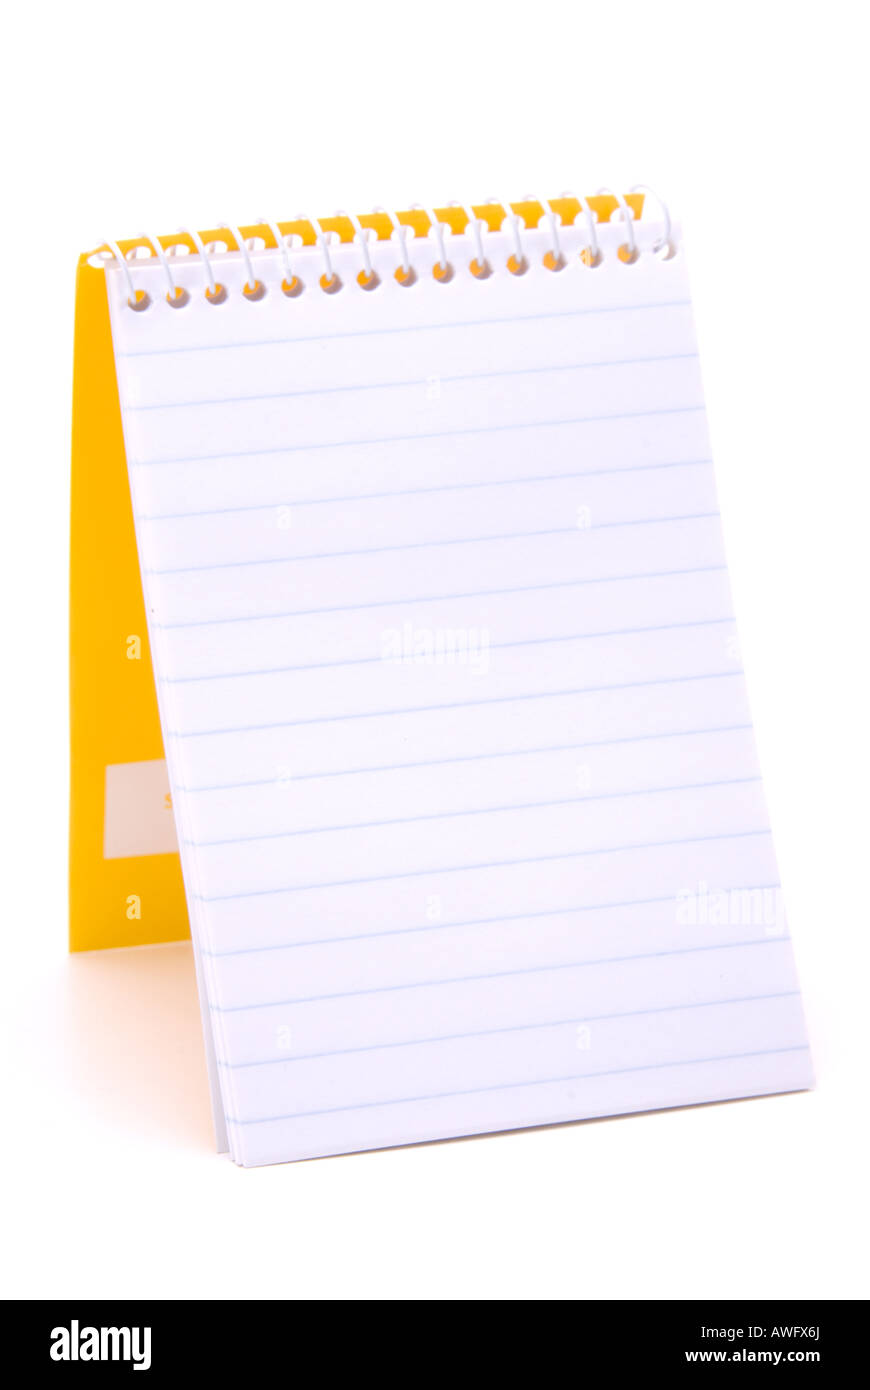 Notepad or Notebook cut out - business concept Stock Photo